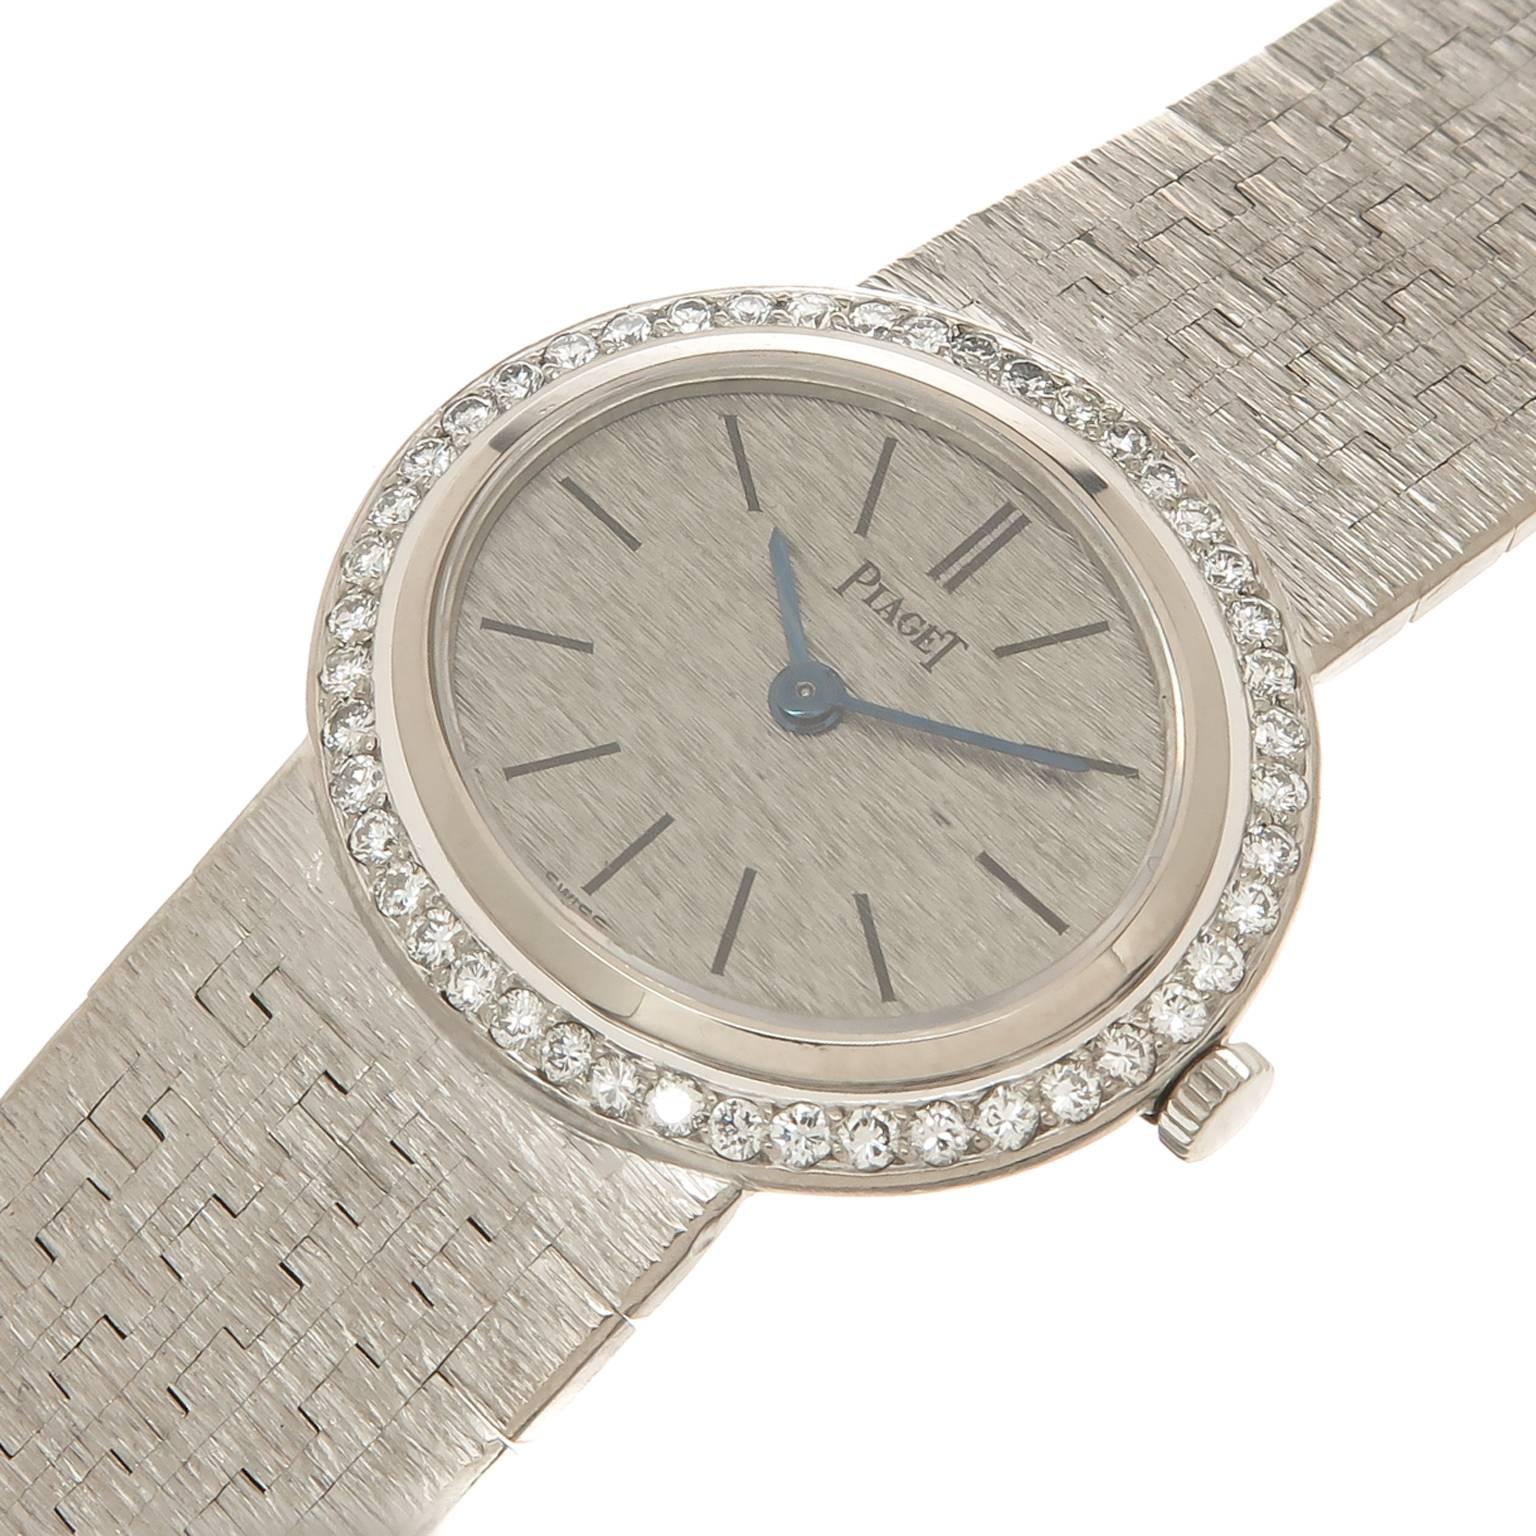 Circa 1970 Piaget Ladies Wrist watch, 18K White gold with a Diamond set bezel of fine white round Brilliant cuts totaling 1 Carat. The case measures 1 1/16 X 7/8 inch and is attached to a soft textured mesh Piaget signed bracelet, total length 6 1/2